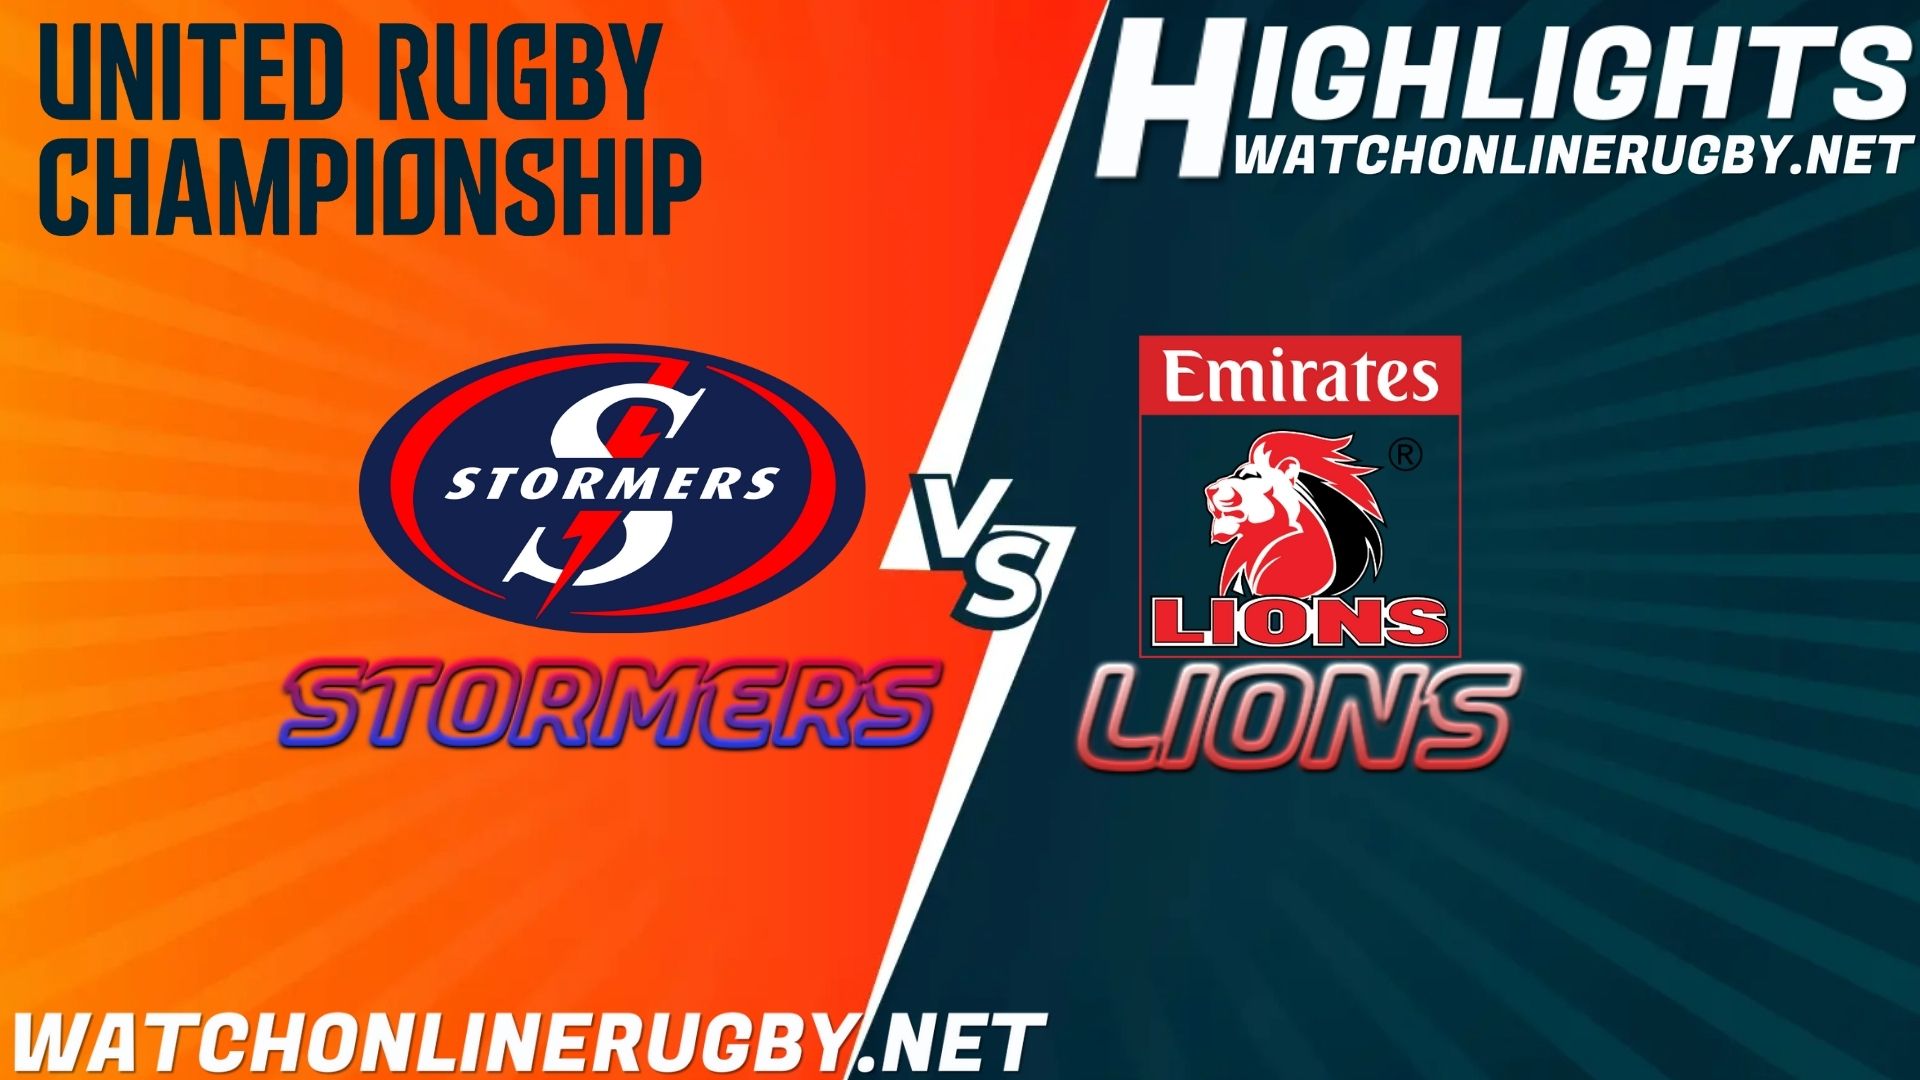 Stormers Vs Lions Rugby United Rugby Championship 2021 RD 7